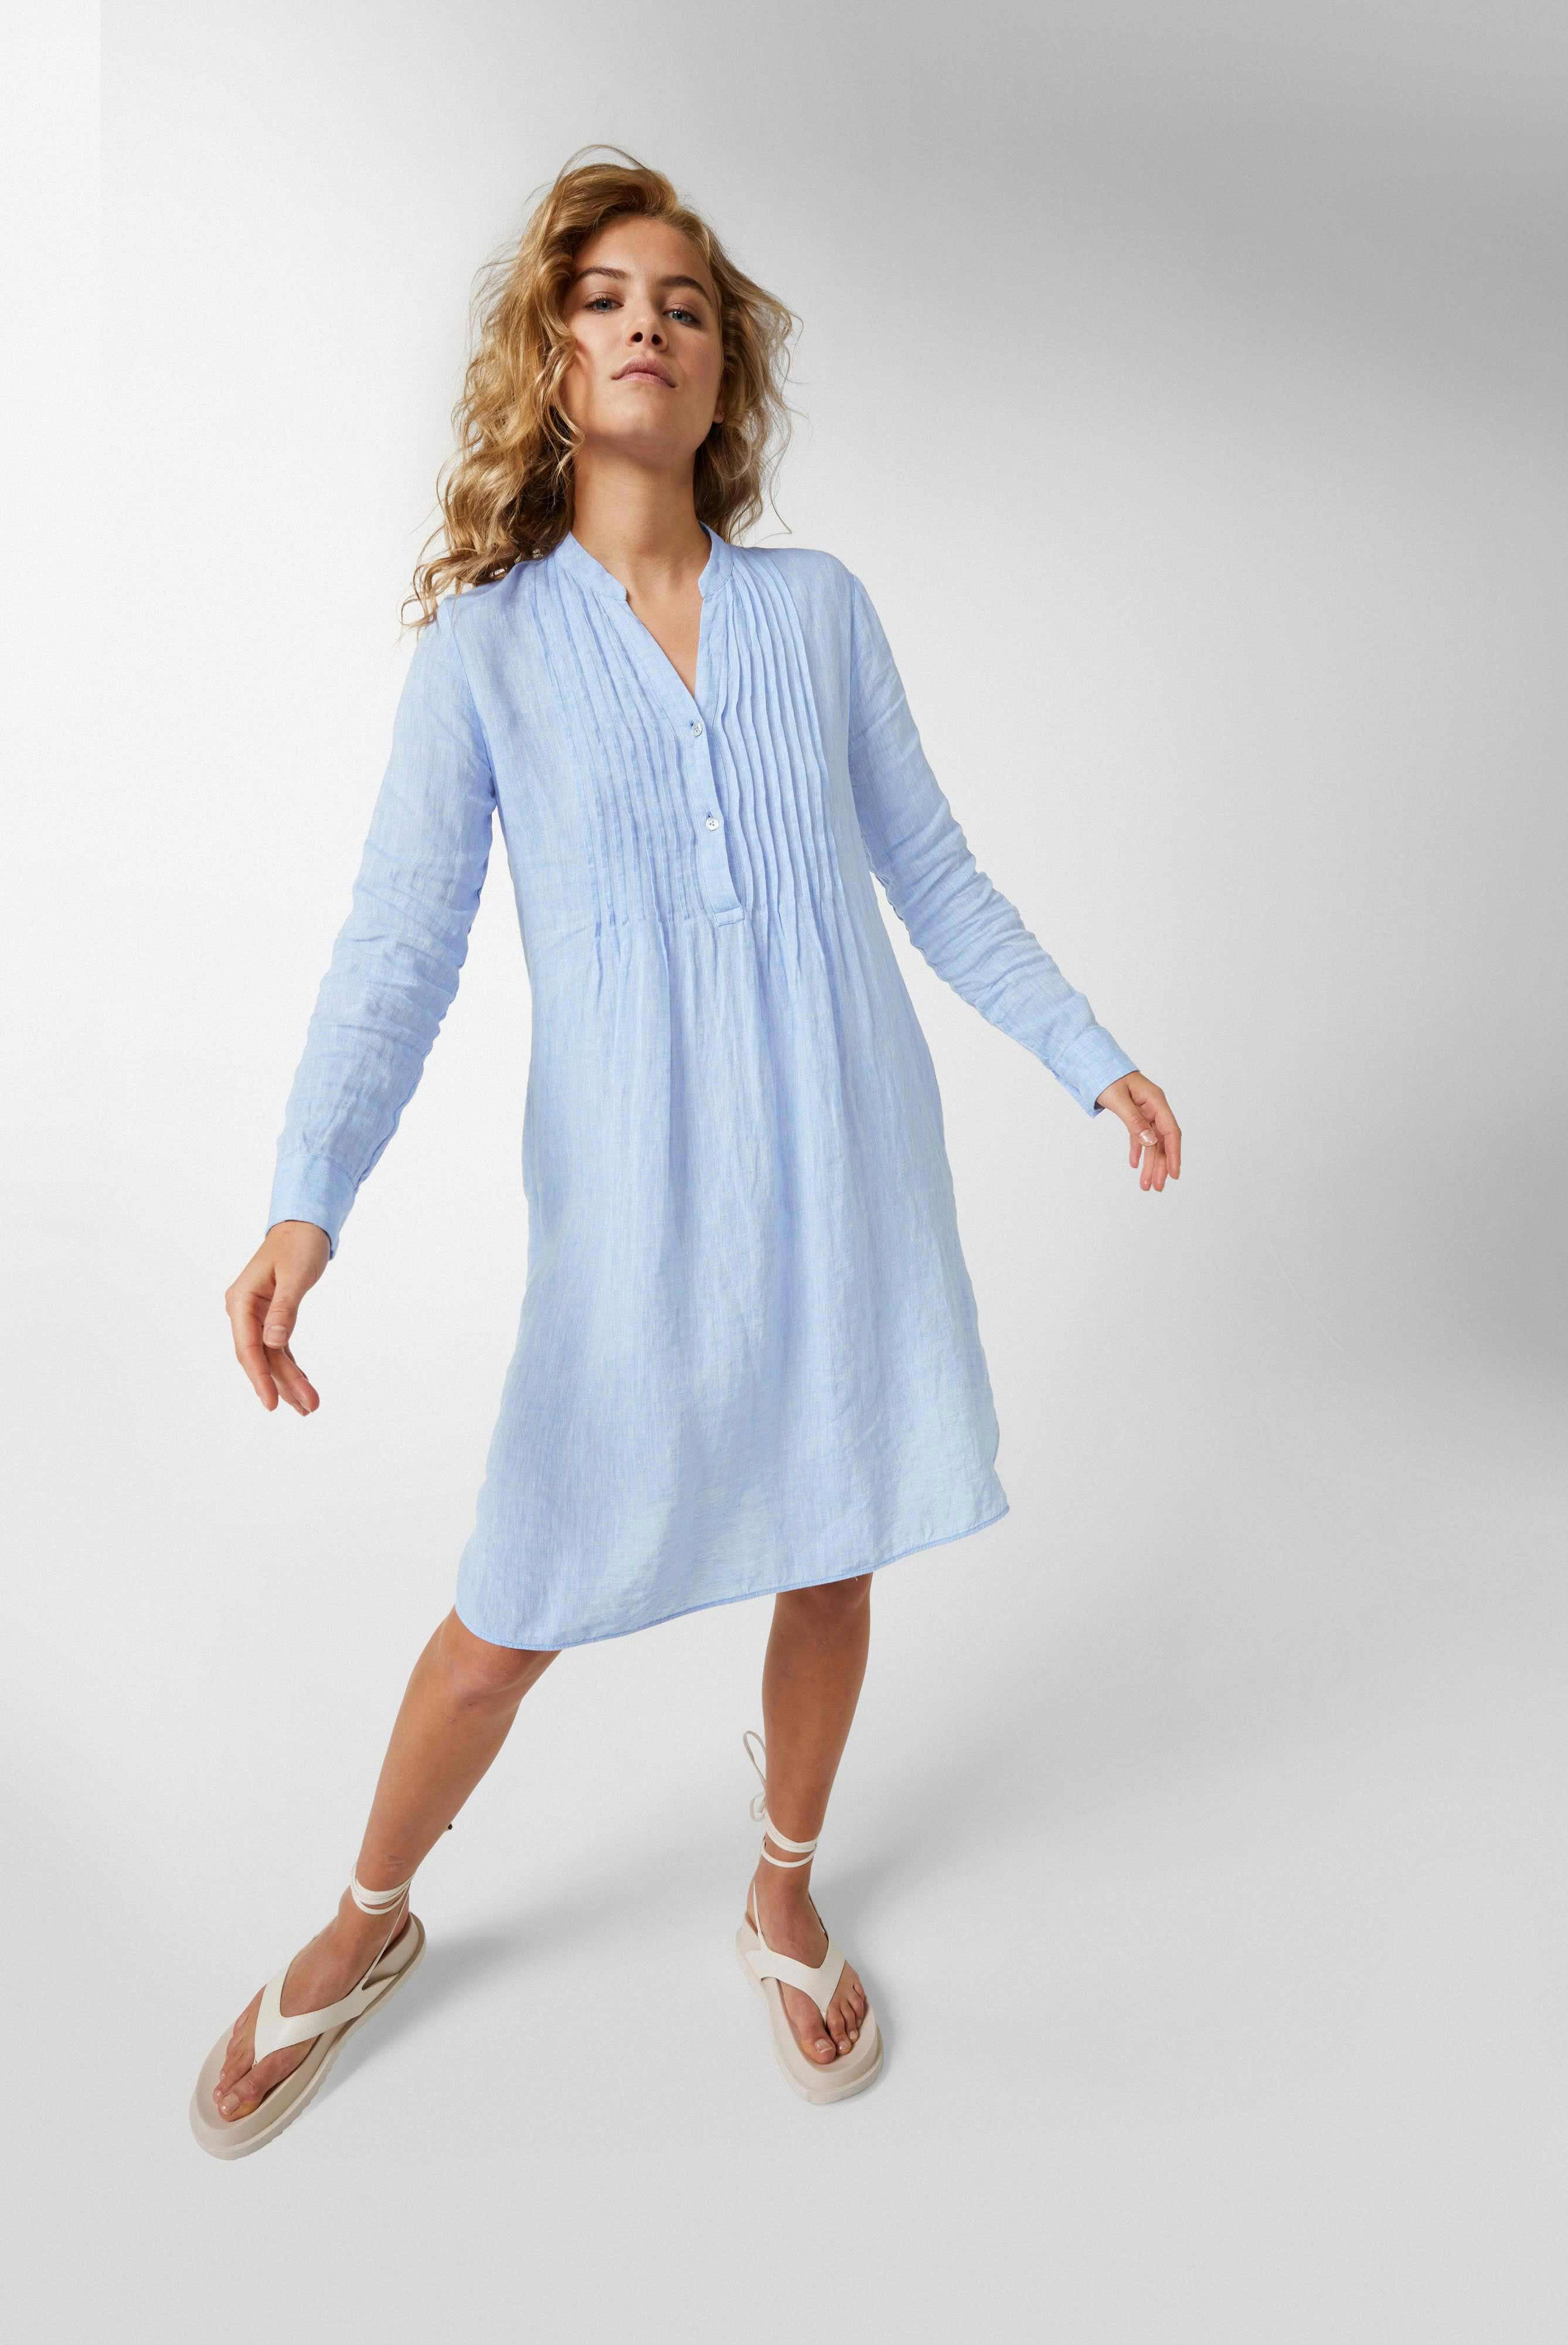 Dresses & Skirts+Knee-length linen dress with stand-up collar and ruffles blue+05.657K.2L.155038.720.34